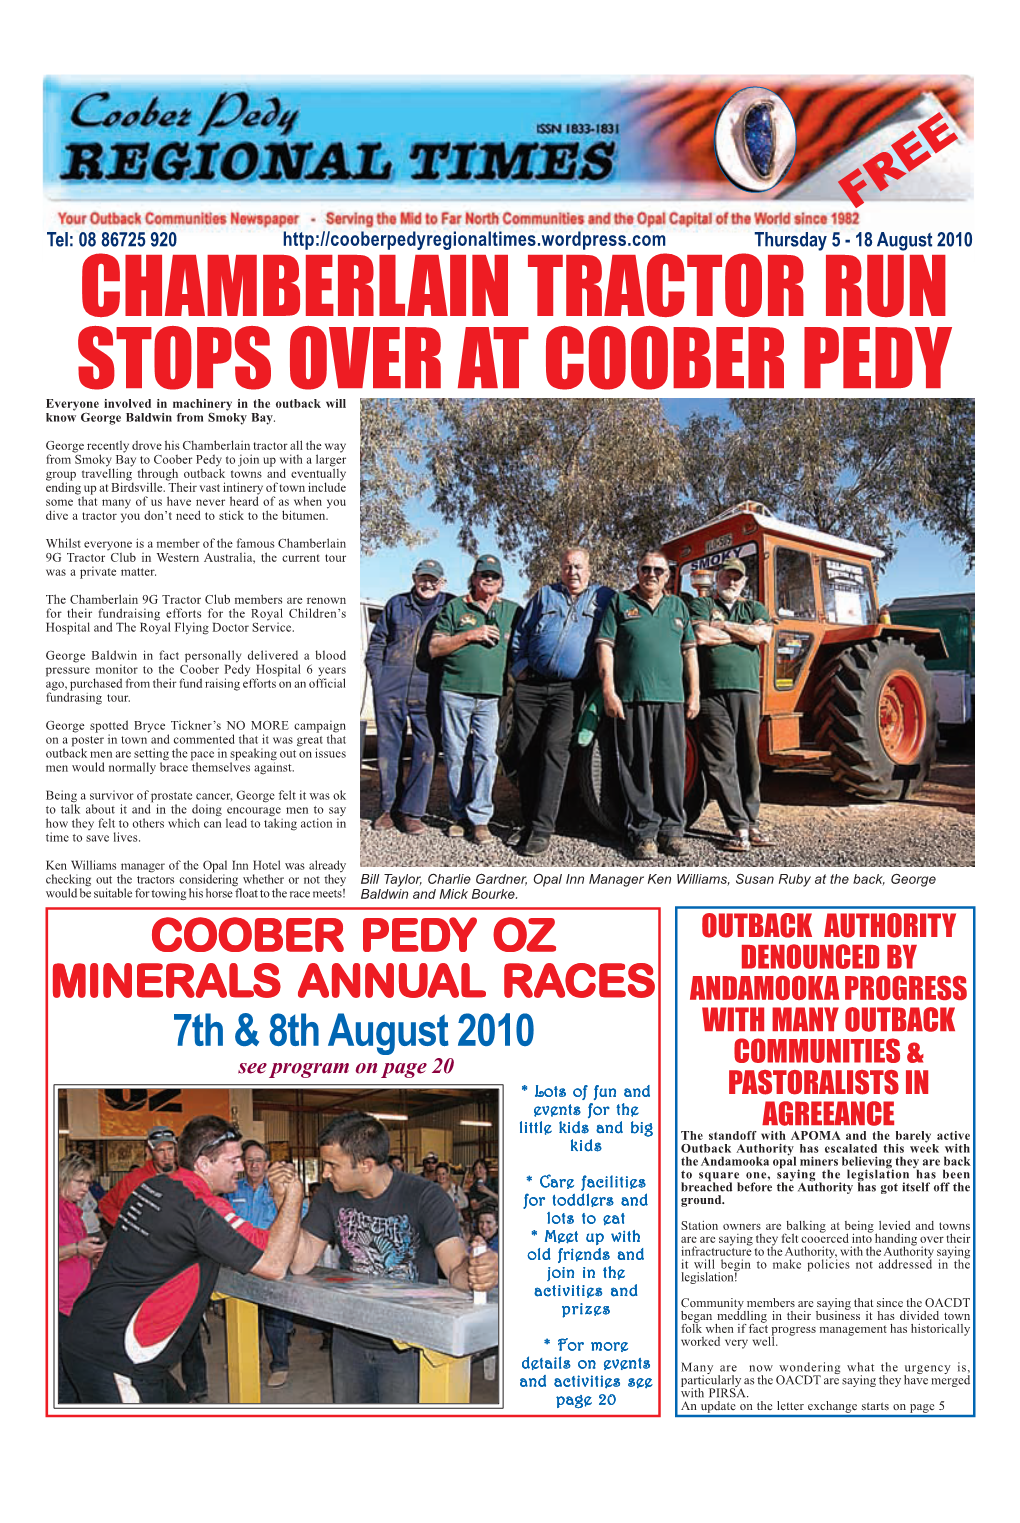 CHAMBERLAIN TRACTOR RUN STOPS OVER at COOBER PEDY Everyone Involved in Machinery in the Outback Will Know George Baldwin from Smoky Bay